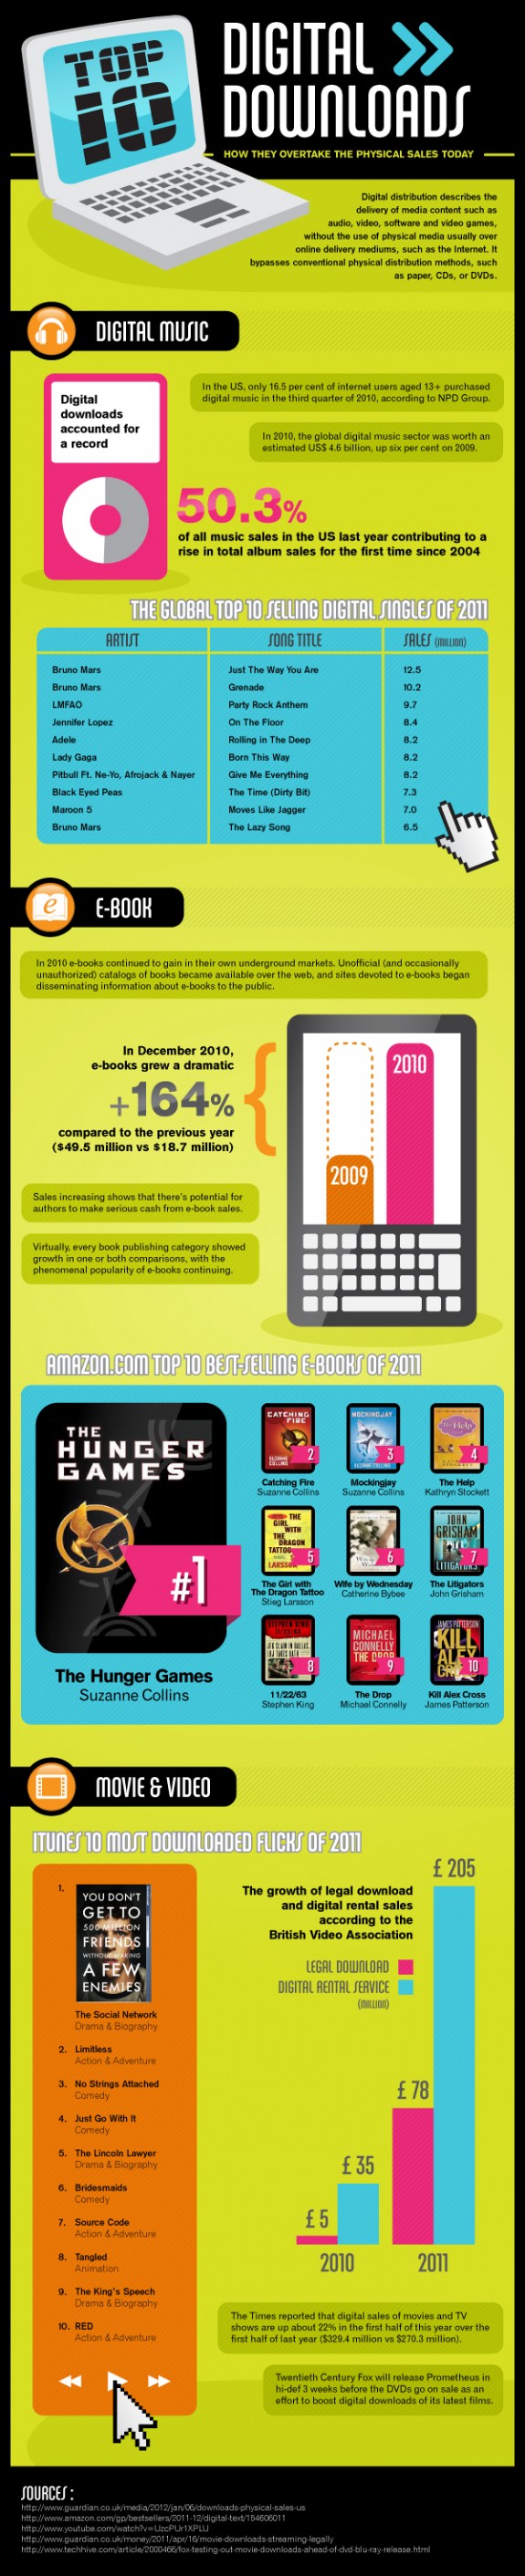 Thumbnail for Digital Downloads Infographic